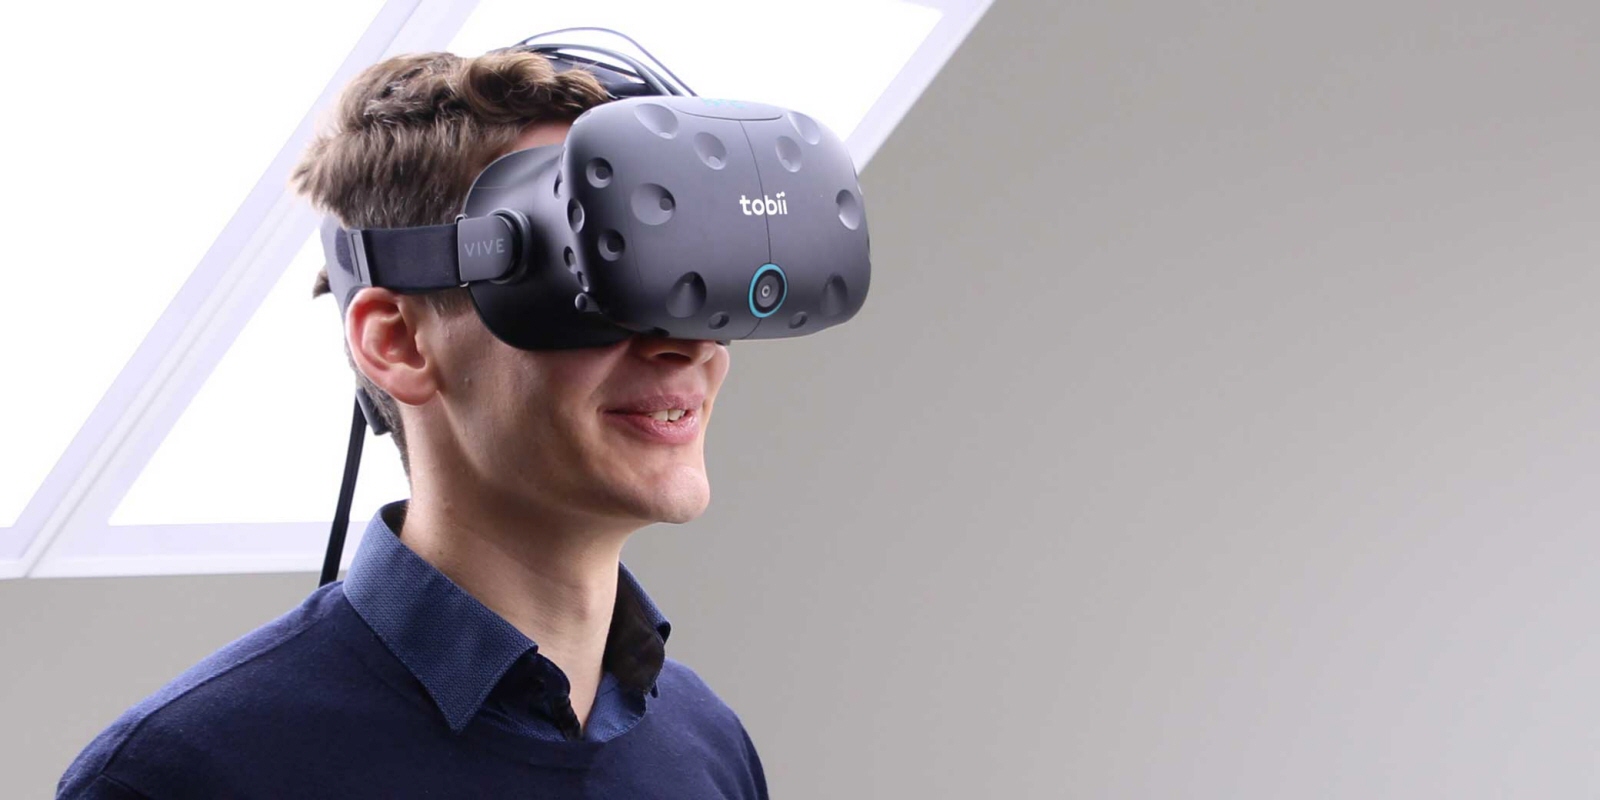 Tobii Pro VR Integration based on HTC Vive HMD for behavioral research in virtual environments